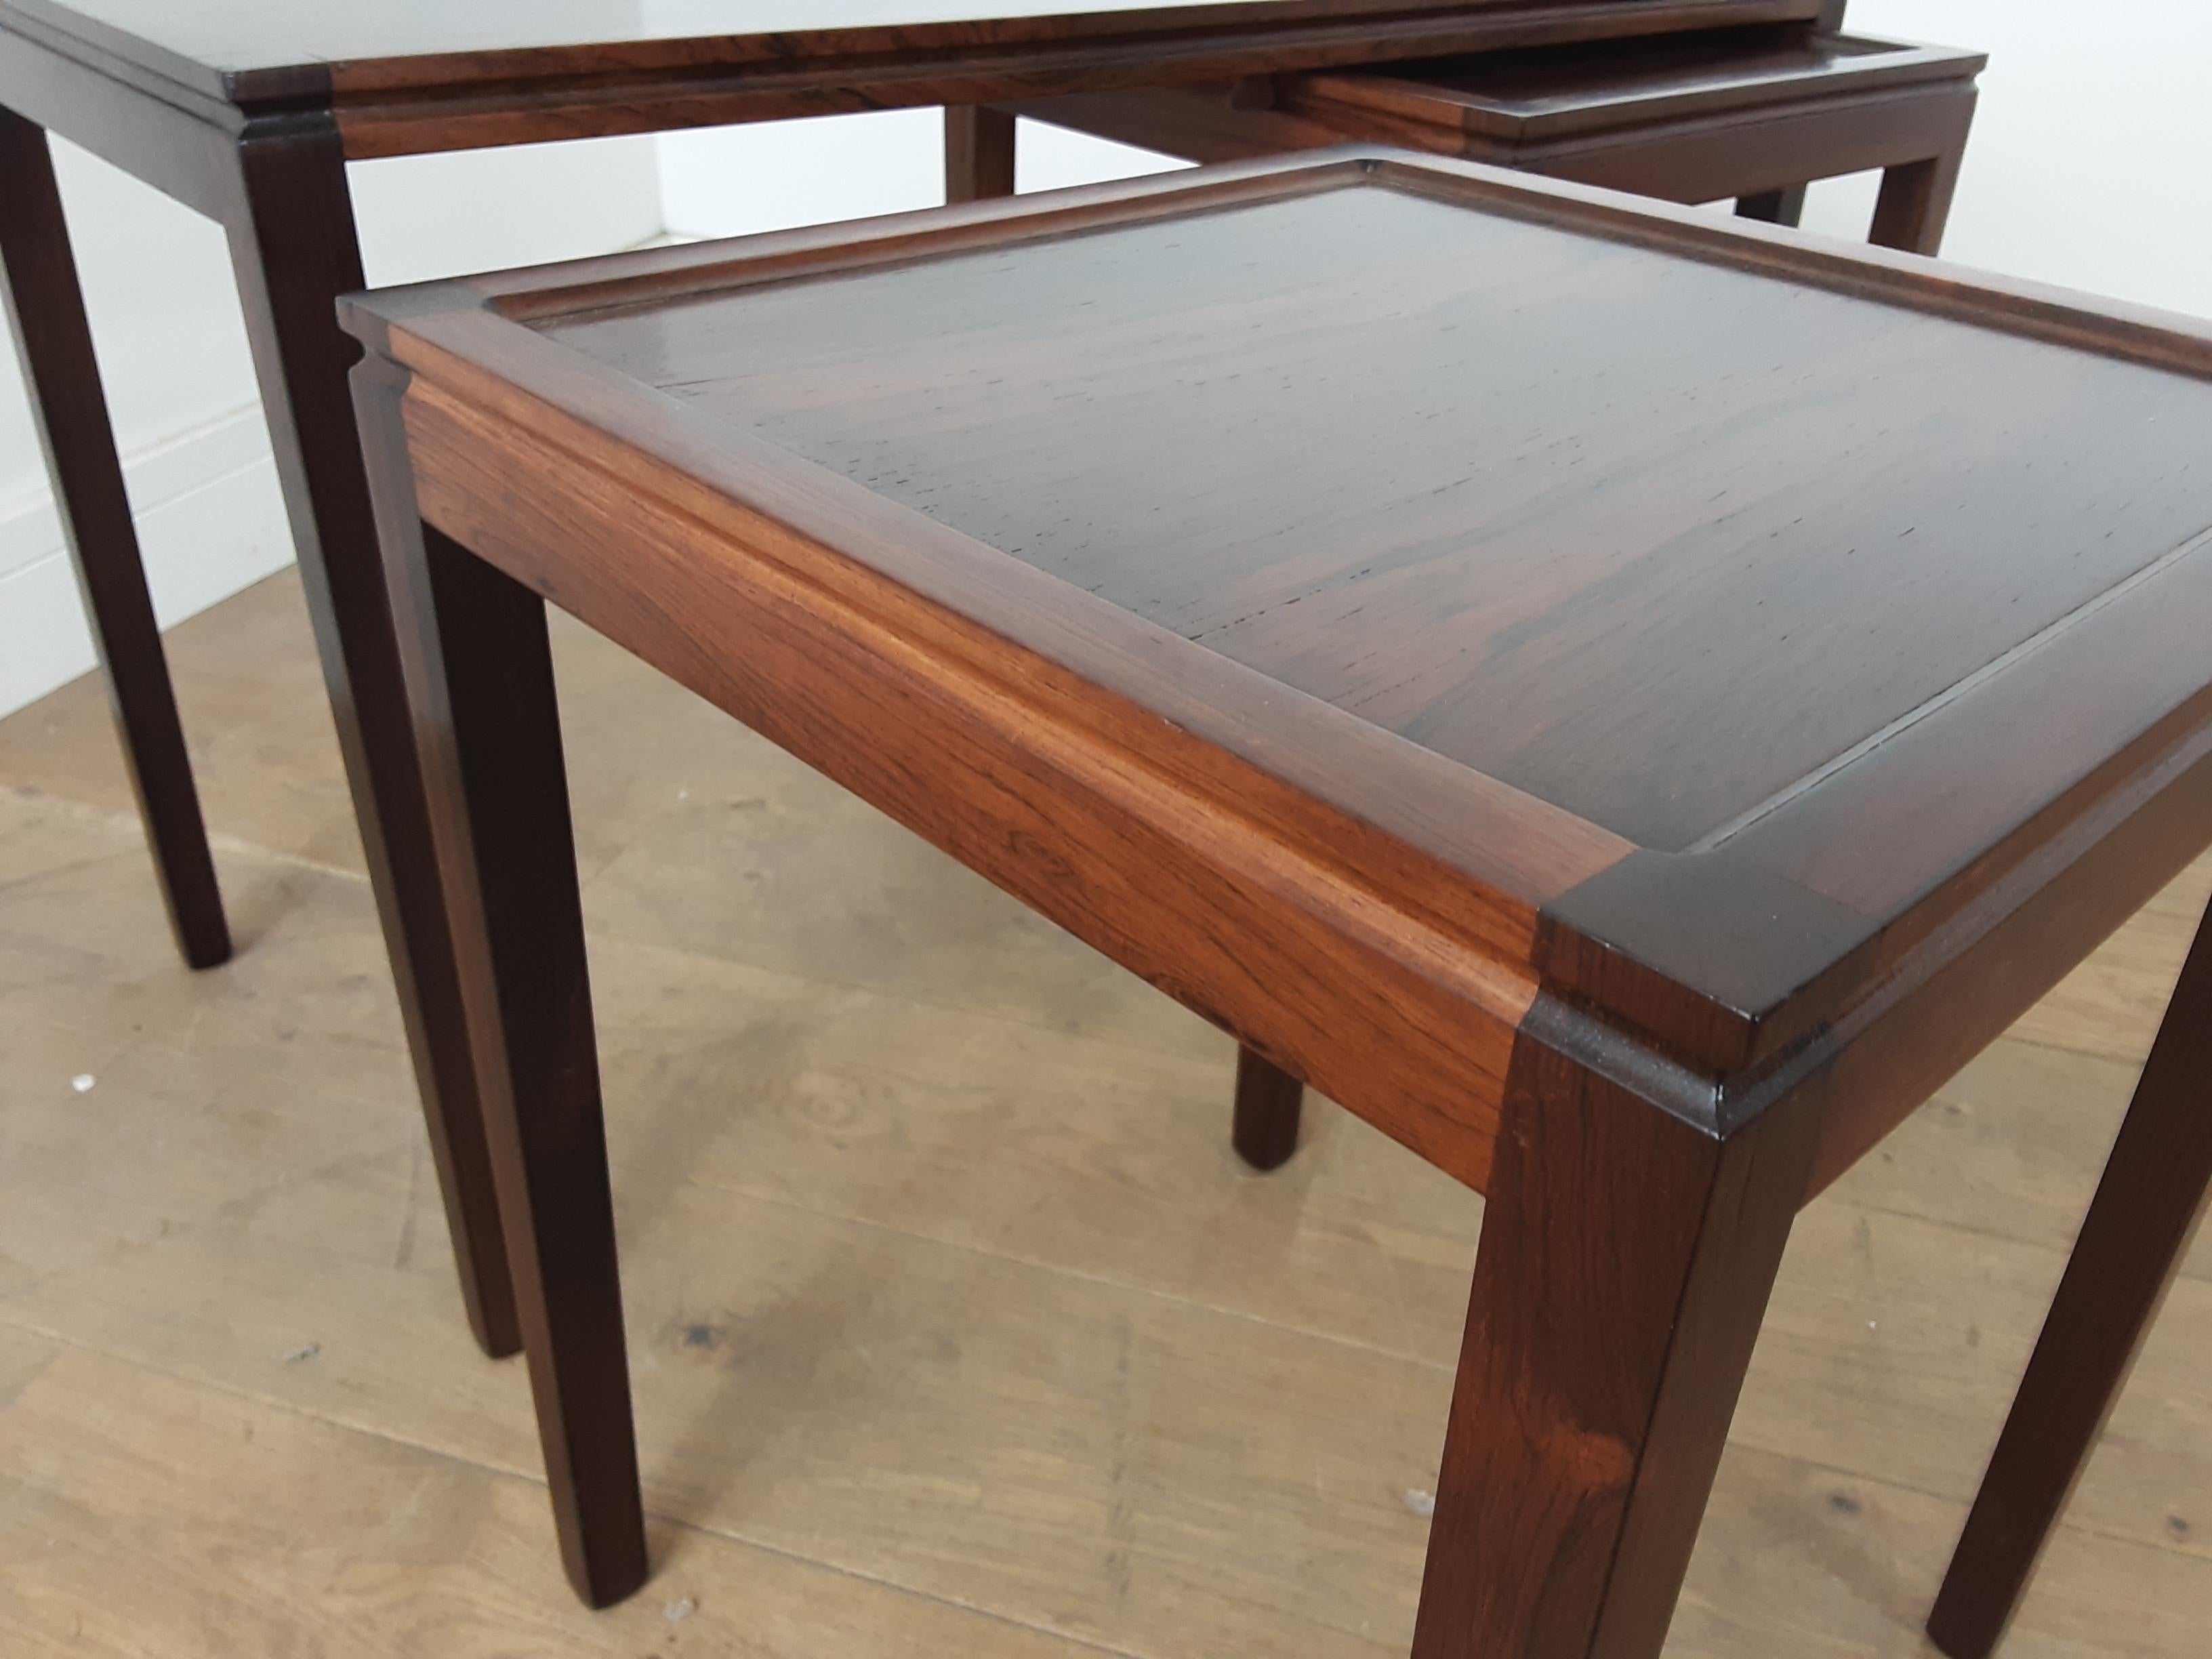 Midcentury Nest of Tables in Deep Brown Figured Rosewood circa 1960 from Denmark For Sale 4